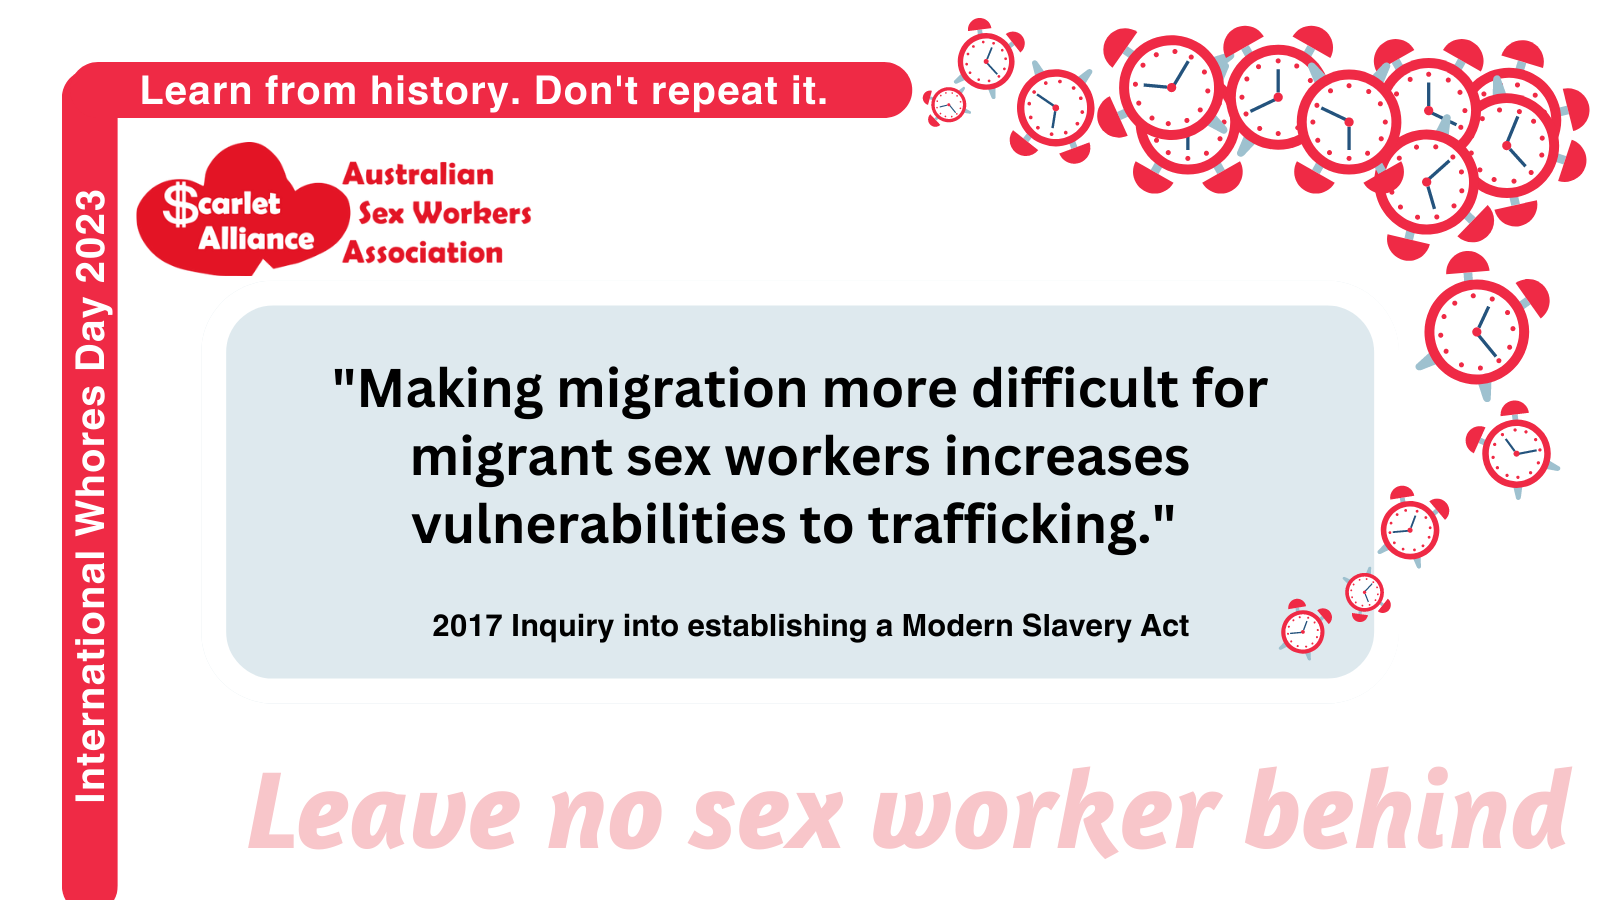 “Migrant sex workers need increased access to safe migration pathways. However, instead of creating safer migration channels for migrant sex workers, the Australian anti-trafficking response has made it more difficult by increasing border security and implementing stricter visa conditions. Making migration more difficult for migrant sex workers increases vulnerabilities to trafficking. Immigration restrictions impede regular migration for many seeking a better life or working conditions. The Palmero Protocol to Prevent, Suppress and Punish Trafficking in Persons Especially Women and Children, supplementing the United Nations Convention Against Transnational Organised Crime (the Protocol) highlights the need to discourage the demand that fosters exploitation that leads to trafficking. Increasing immigration scrutiny and reducing legitimate migration pathways in effect, feeds this demand. Increasing access to legal channels for migrant sex workers to independently enter Australia reduces that potential avenue for exploitation.”